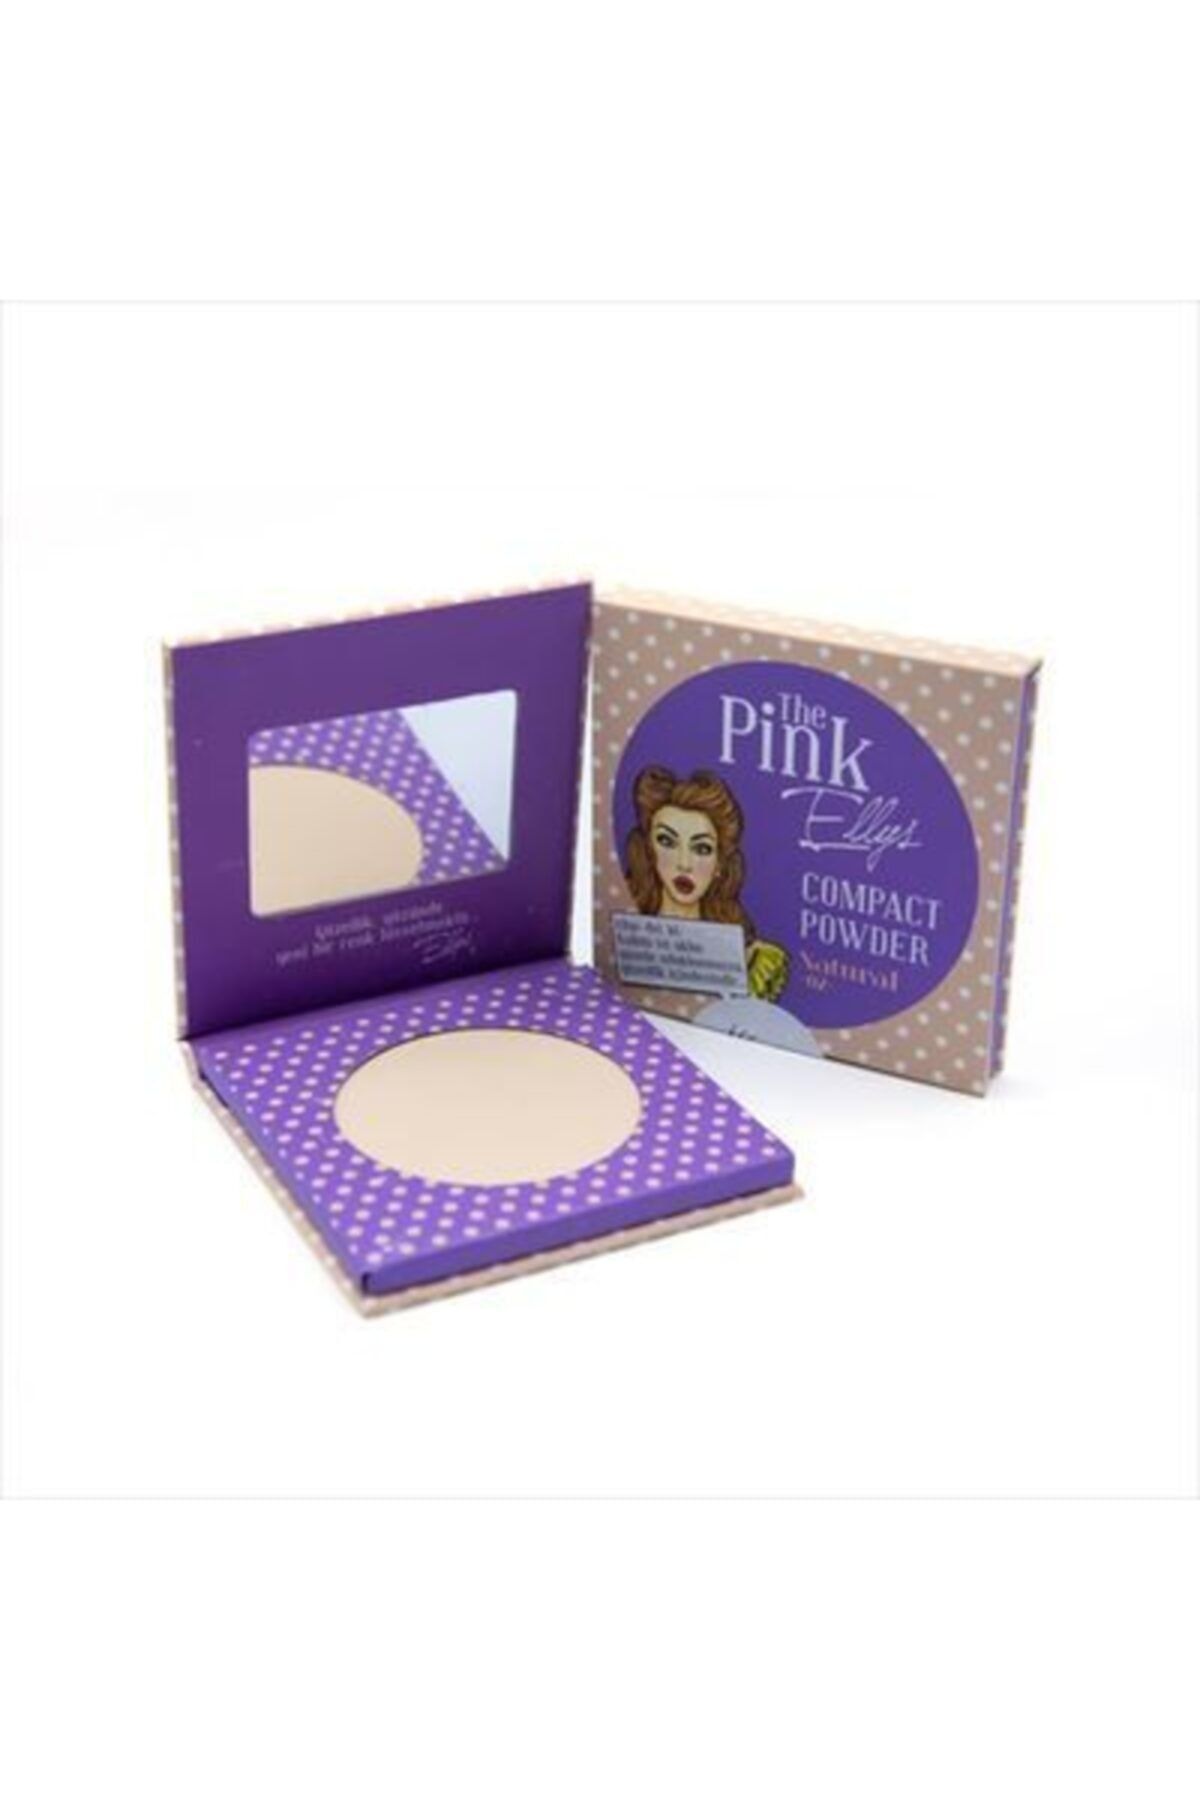 The Pink Ellys Compact Powder Natural Pudra